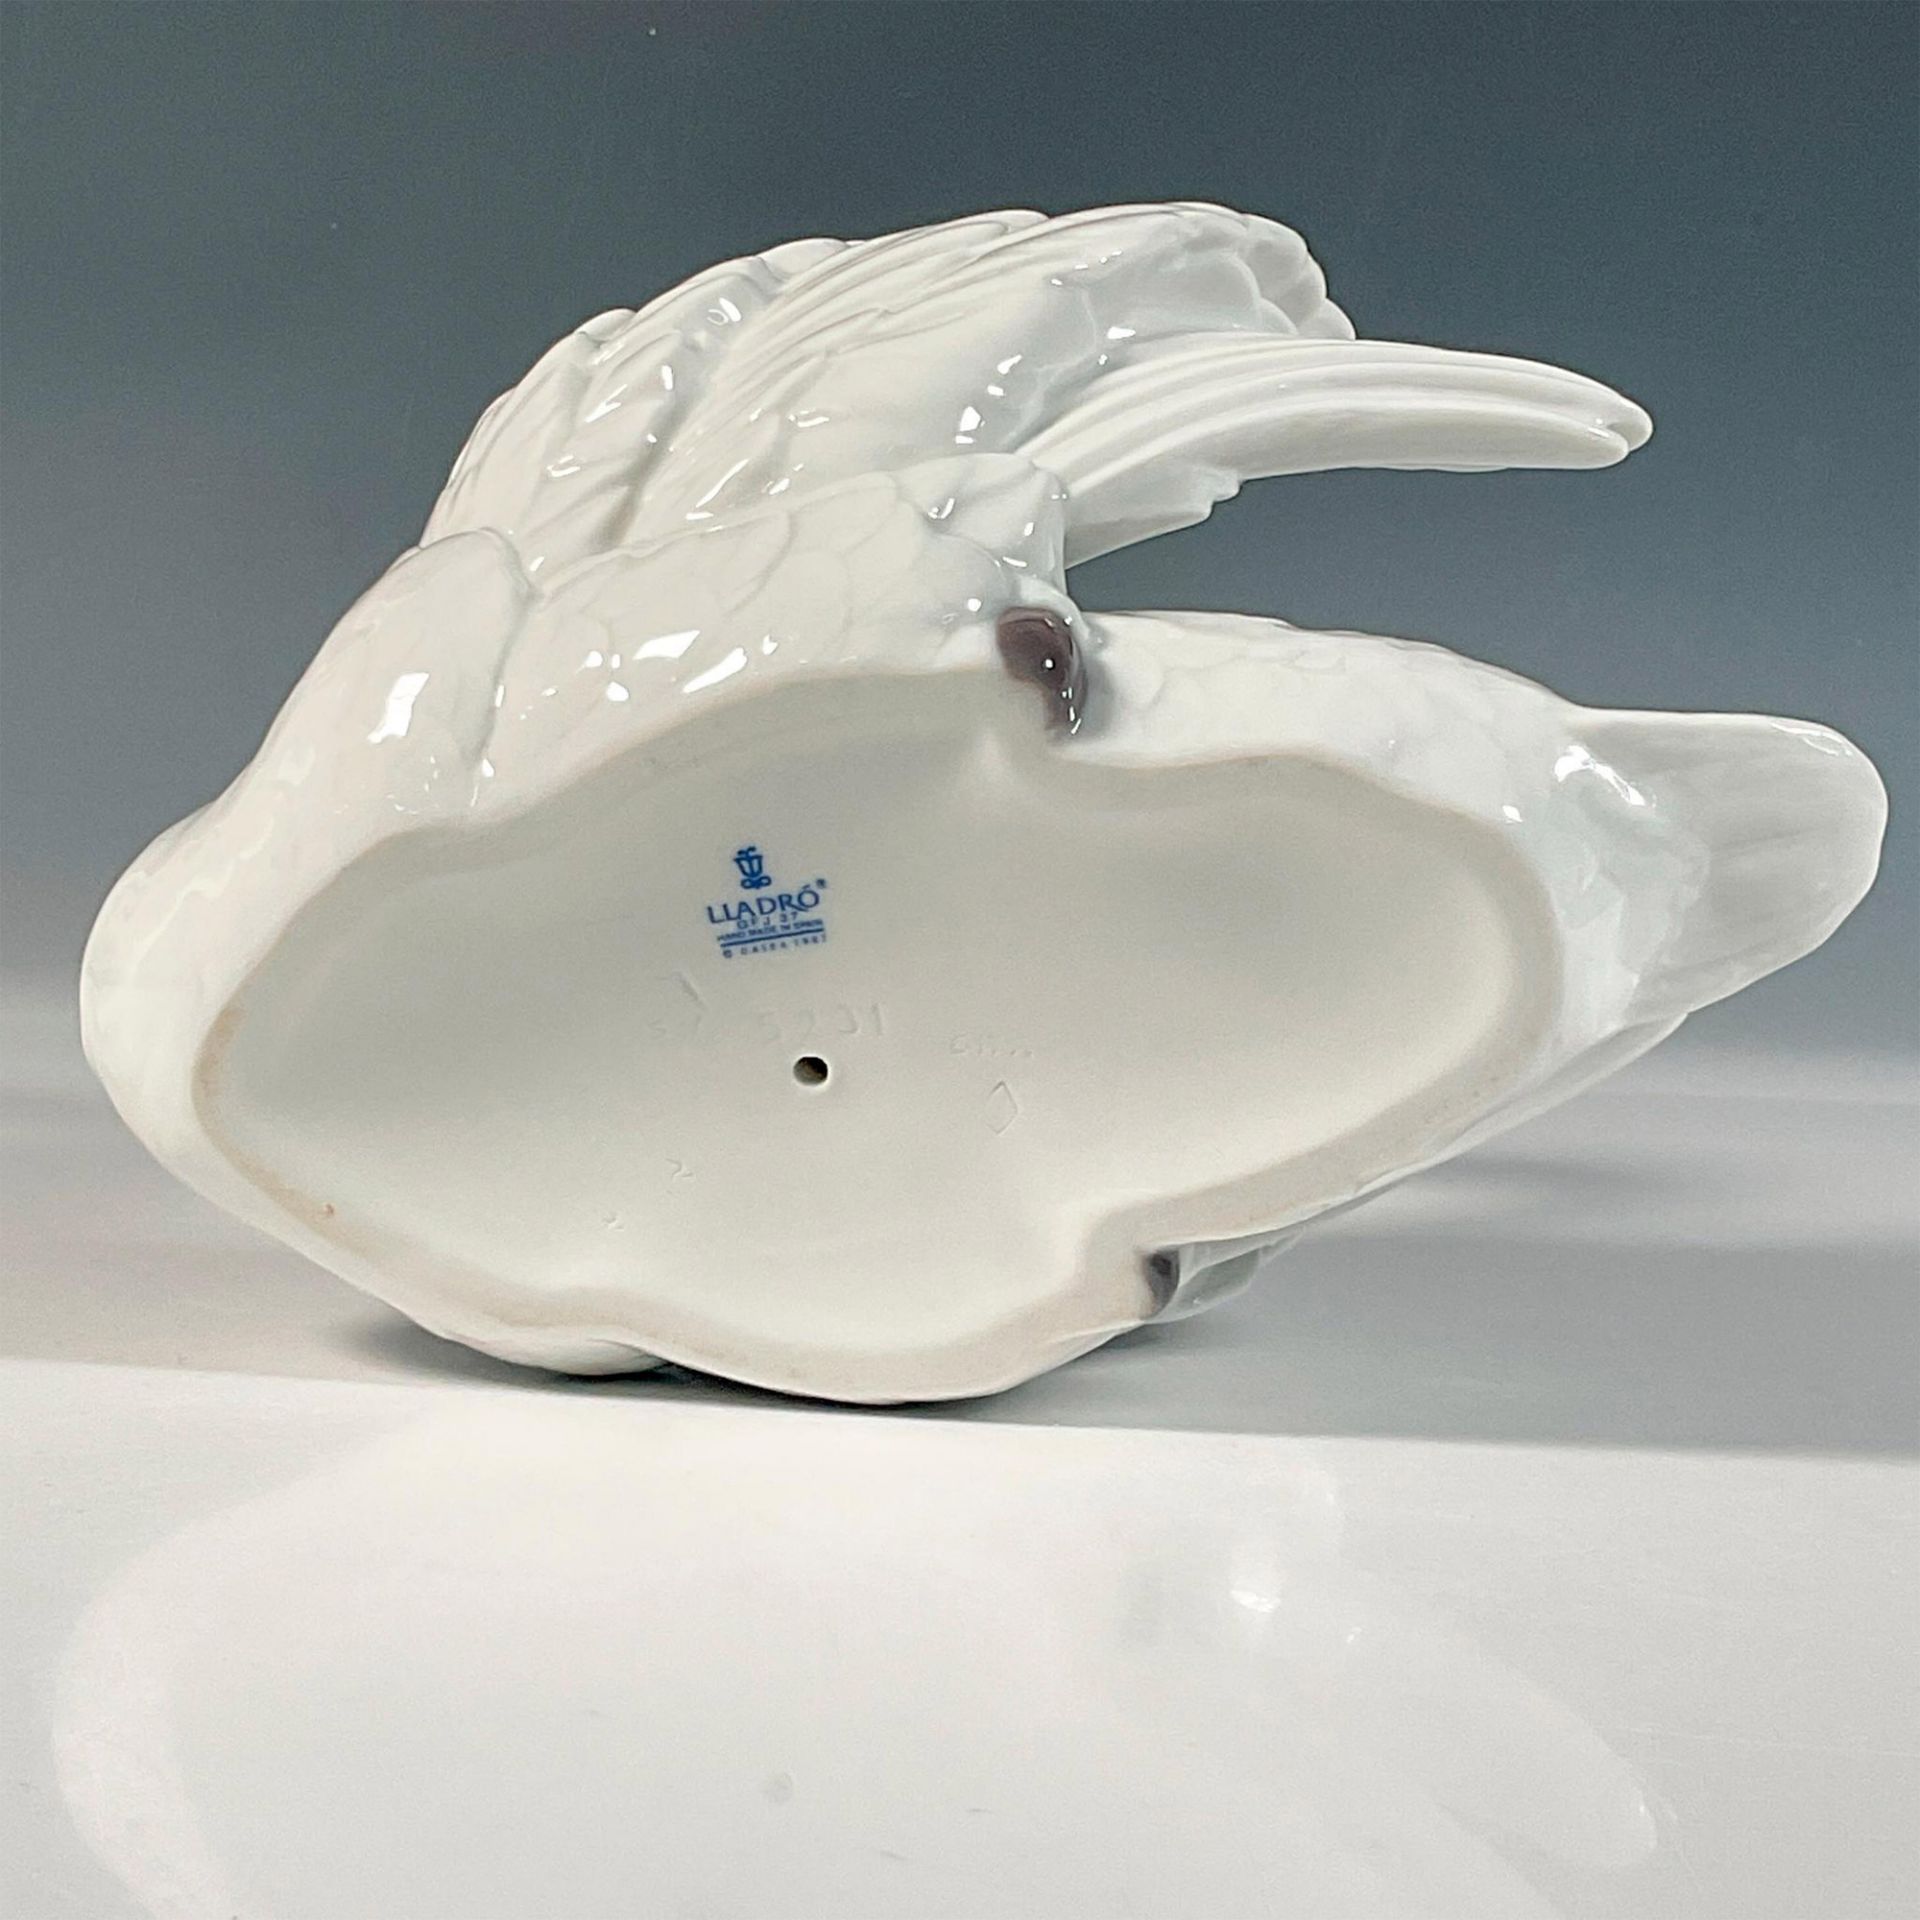 Swan With Wings Spread 1005231 - Lladro Porcelain Figurine - Image 5 of 6